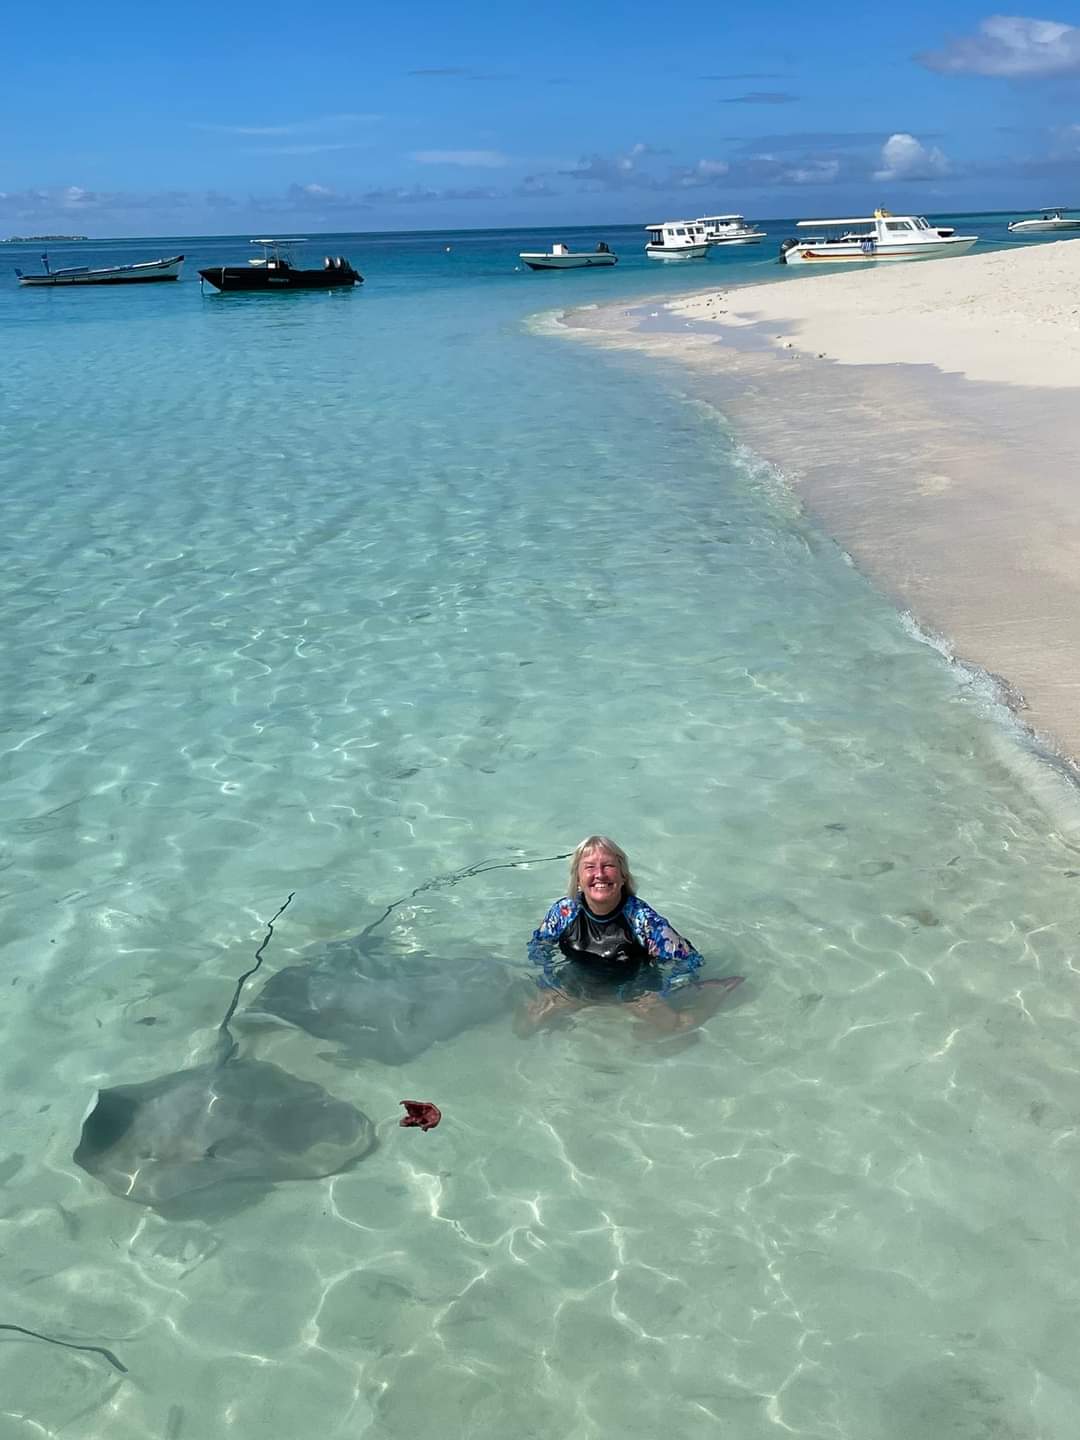 Me with stingrays in the Maldives